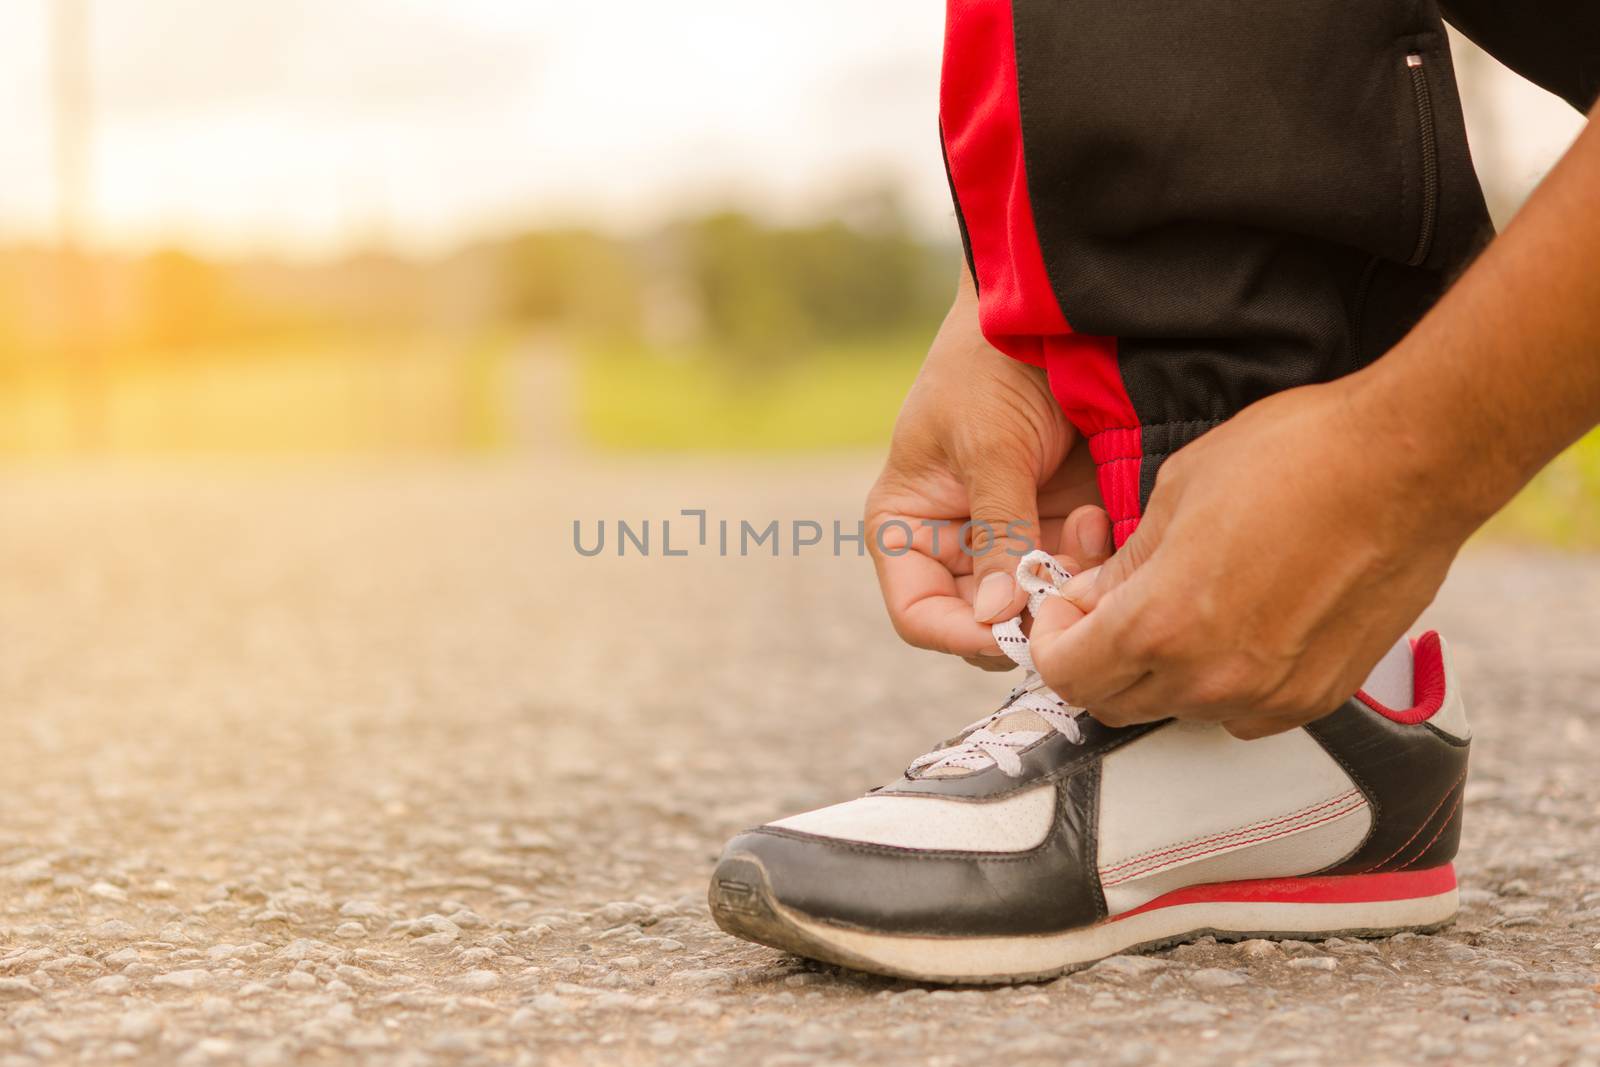 Man  tying shoes at roadside.Or sport man tying shoes.1